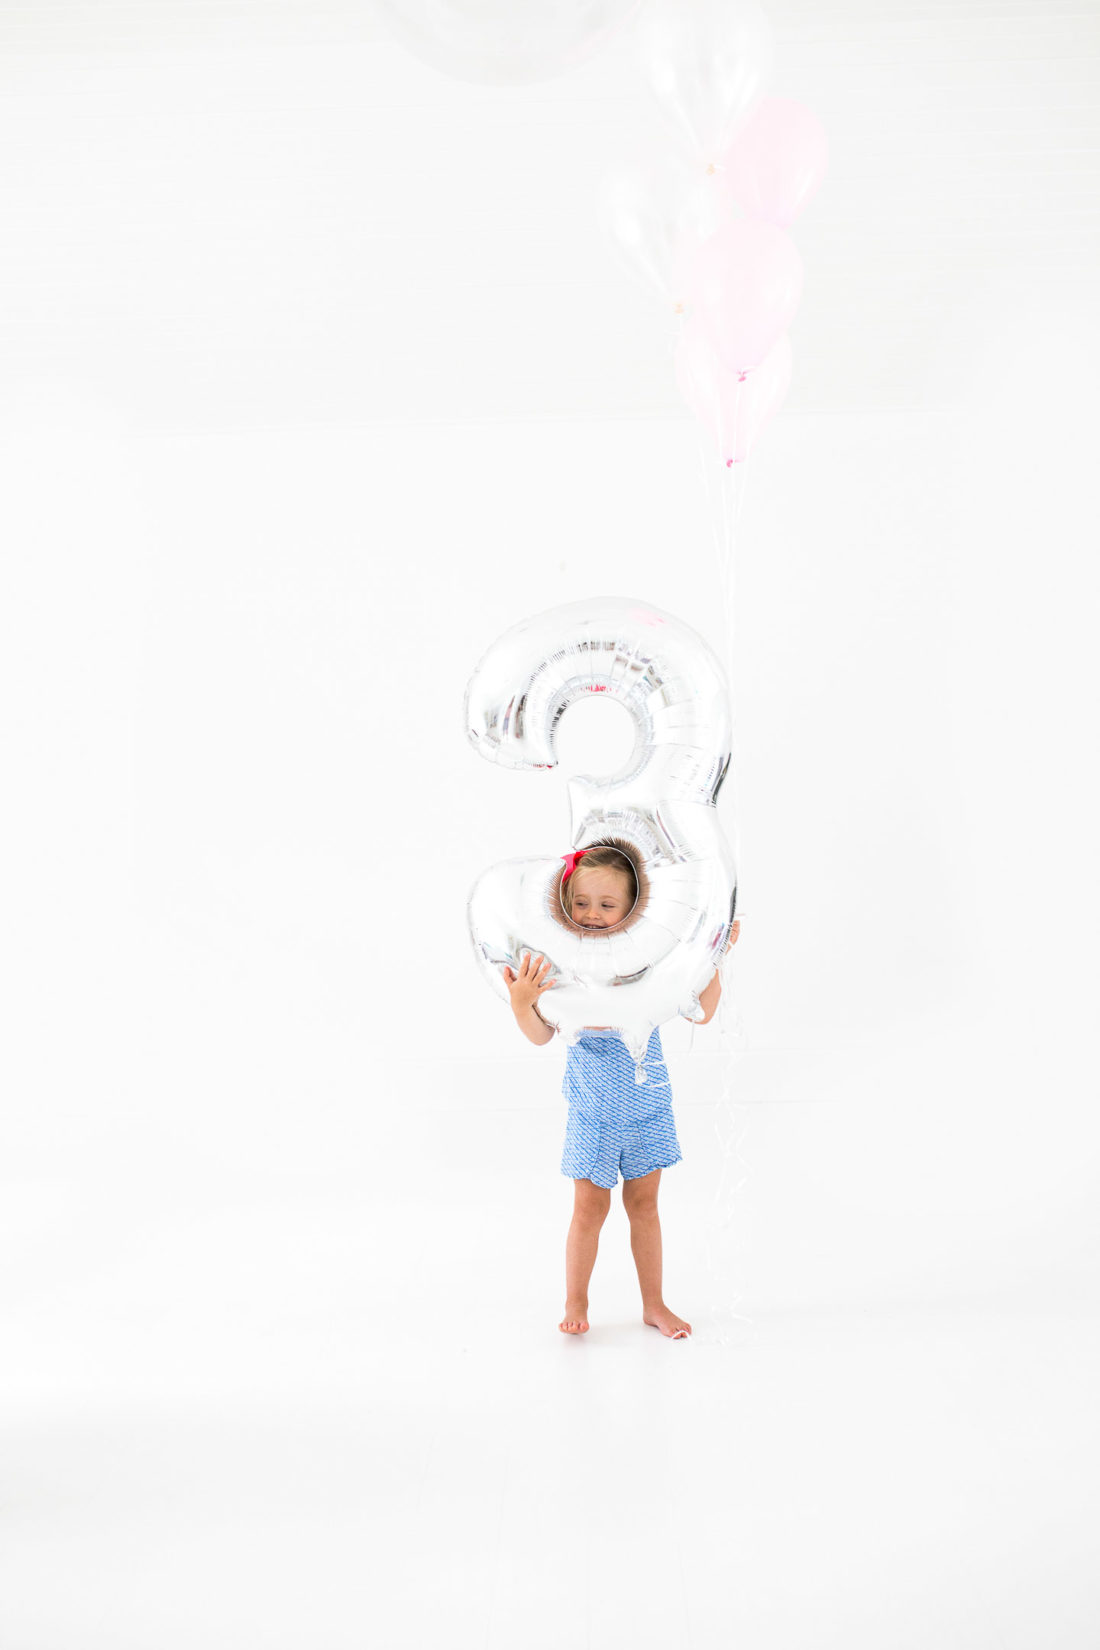 Marlowe Martino poses with a large balloon for her third birthday portraits